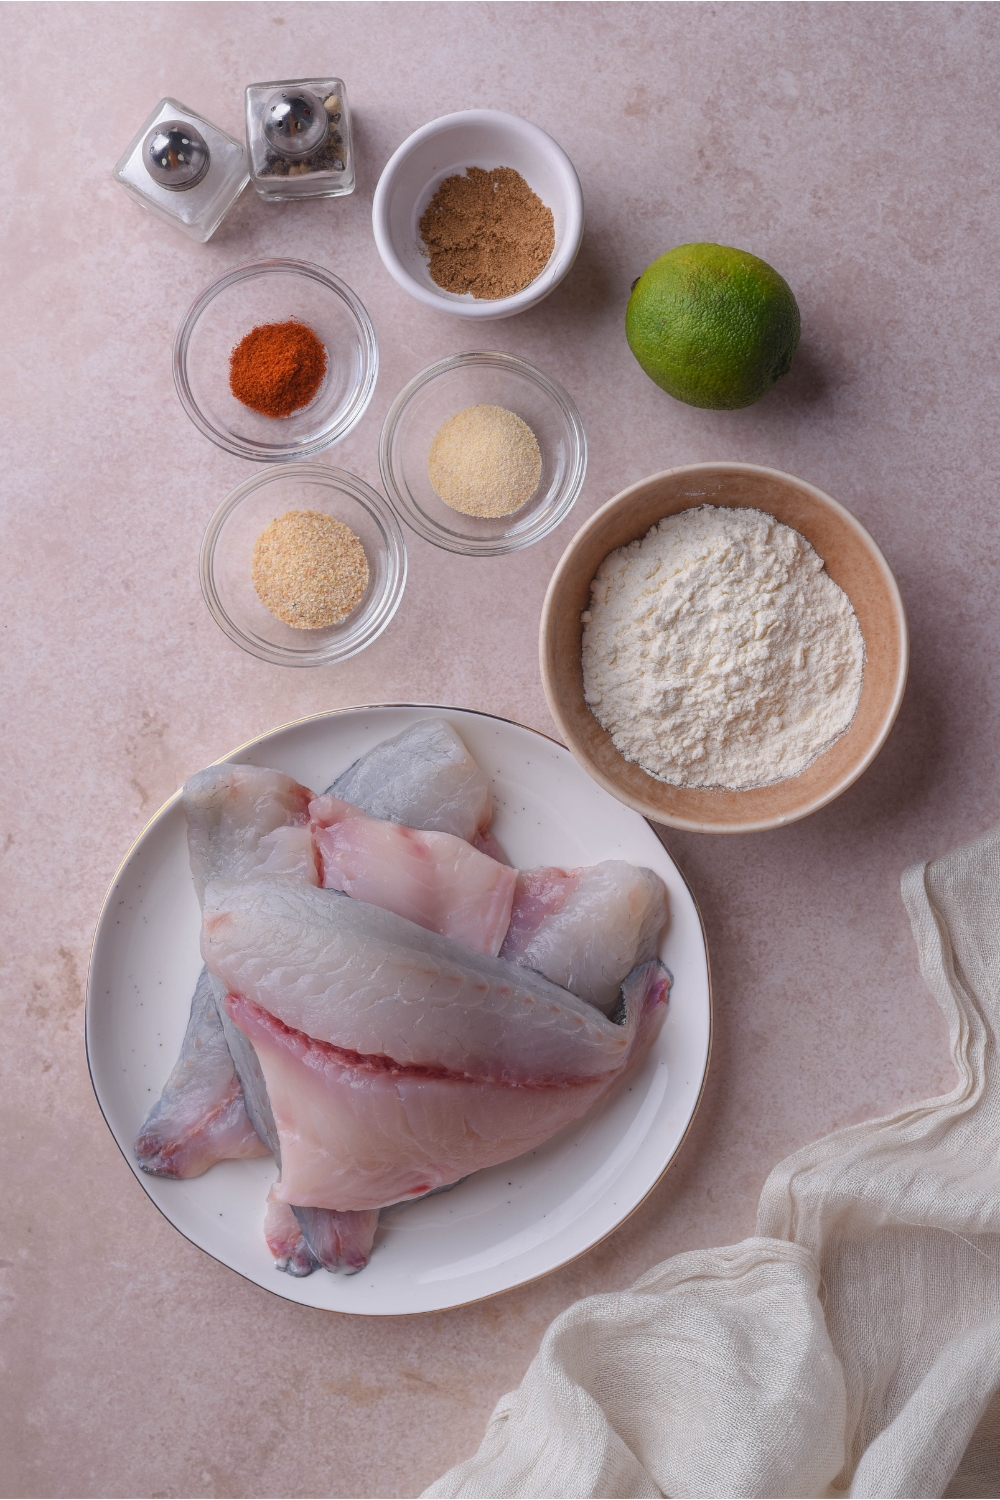 An assortment of ingredients including a plate of tilapia fillets and bowls of flour, spices, a lime, and salt and pepper shakers.